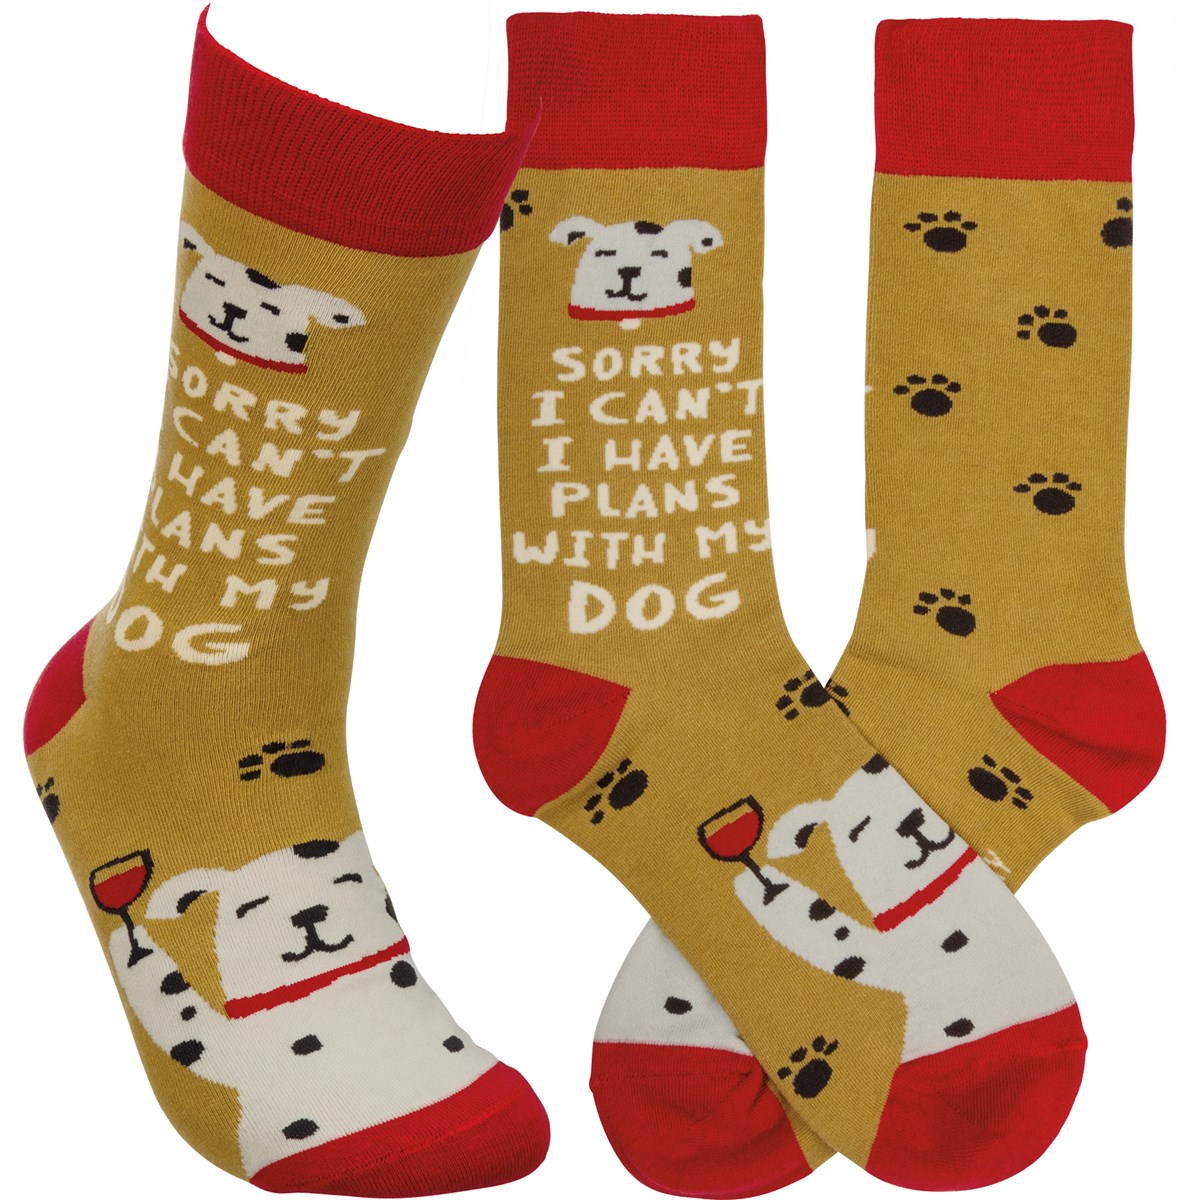 Sorry I Can't I Have Plans With My Dog Socks - Cotton, Nylon, Spandex